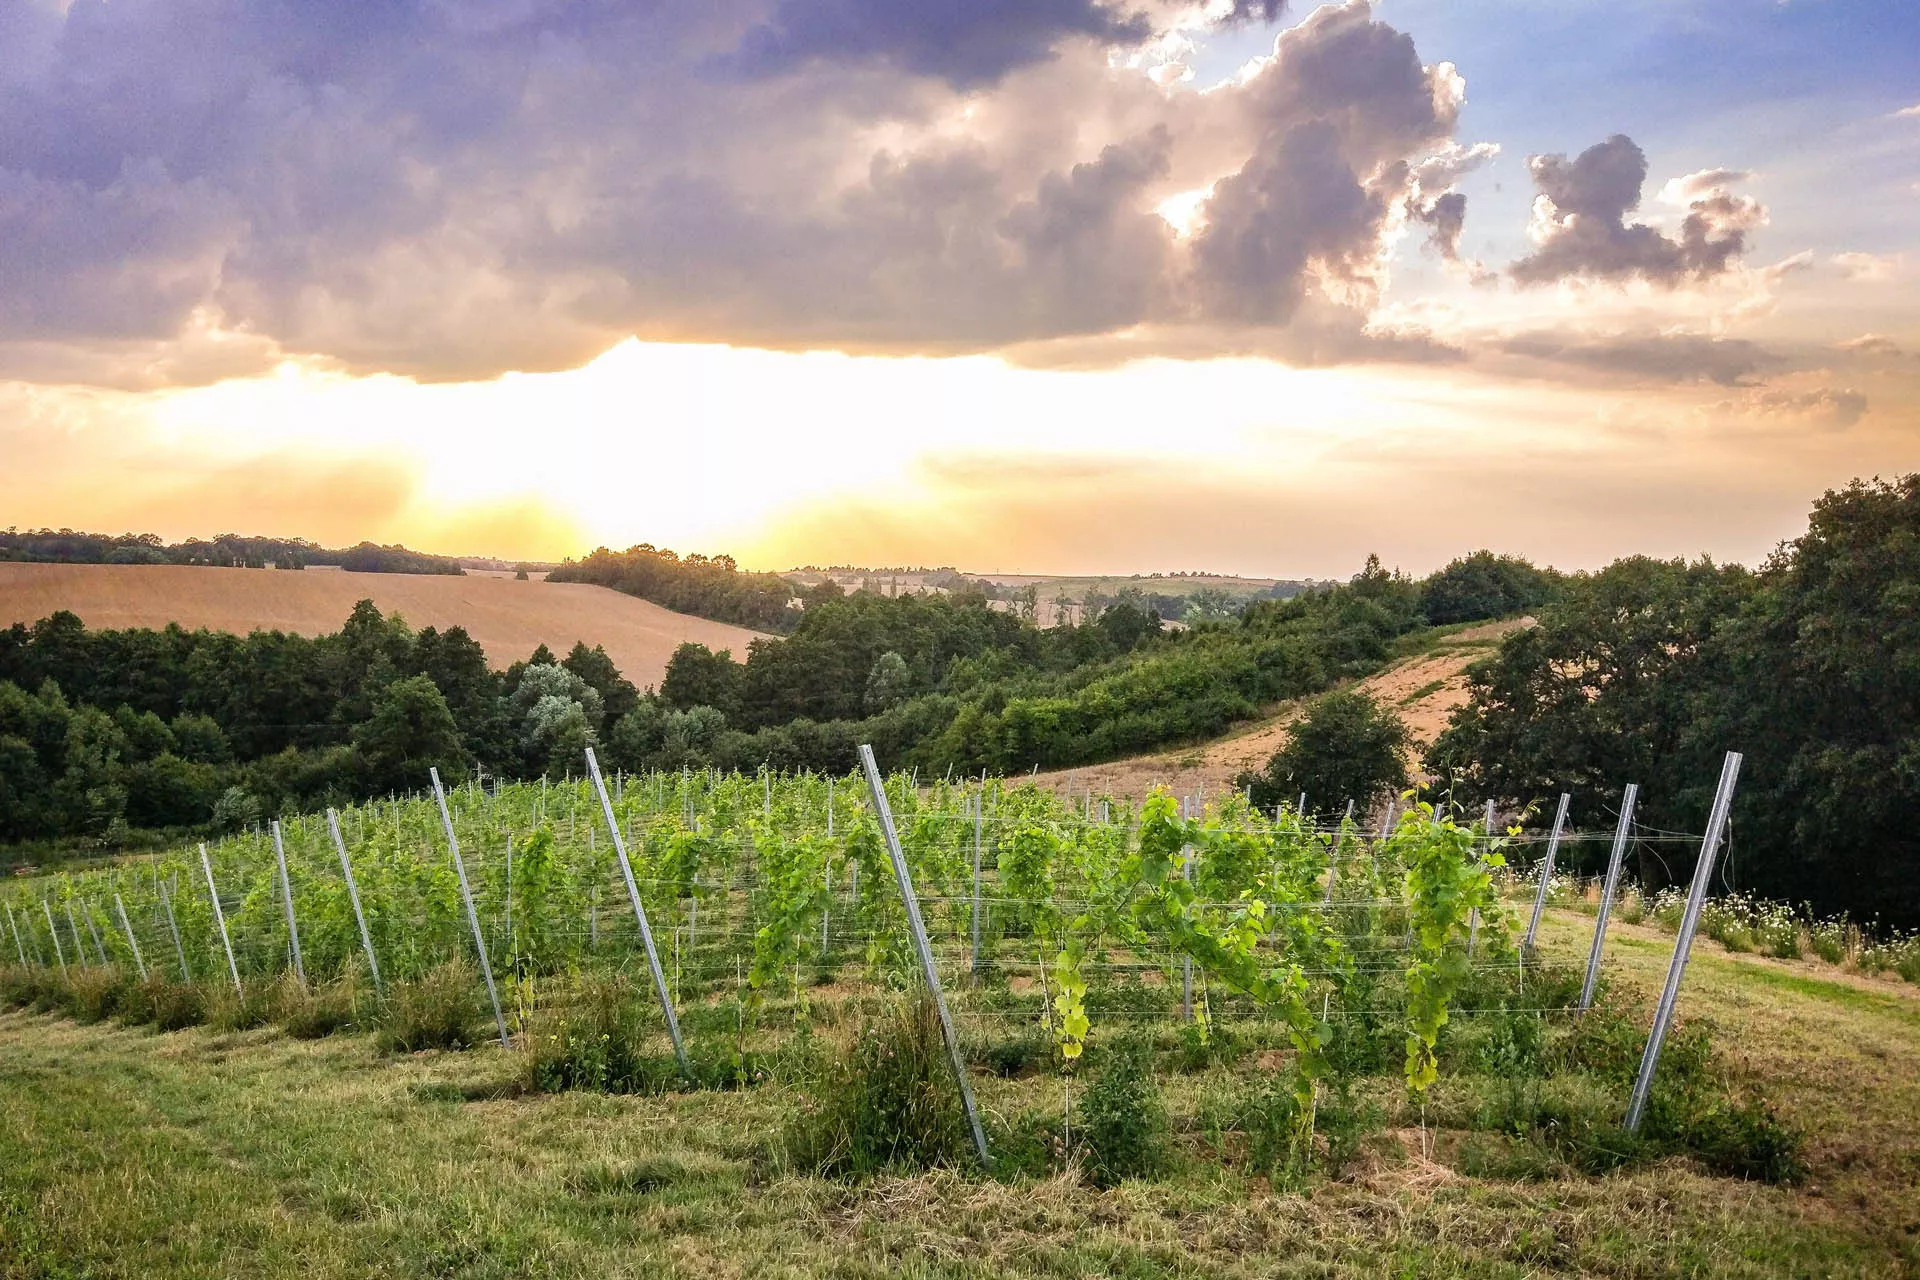 Vineyard 55-100 in Poland, Europe | Wineries - Rated 1